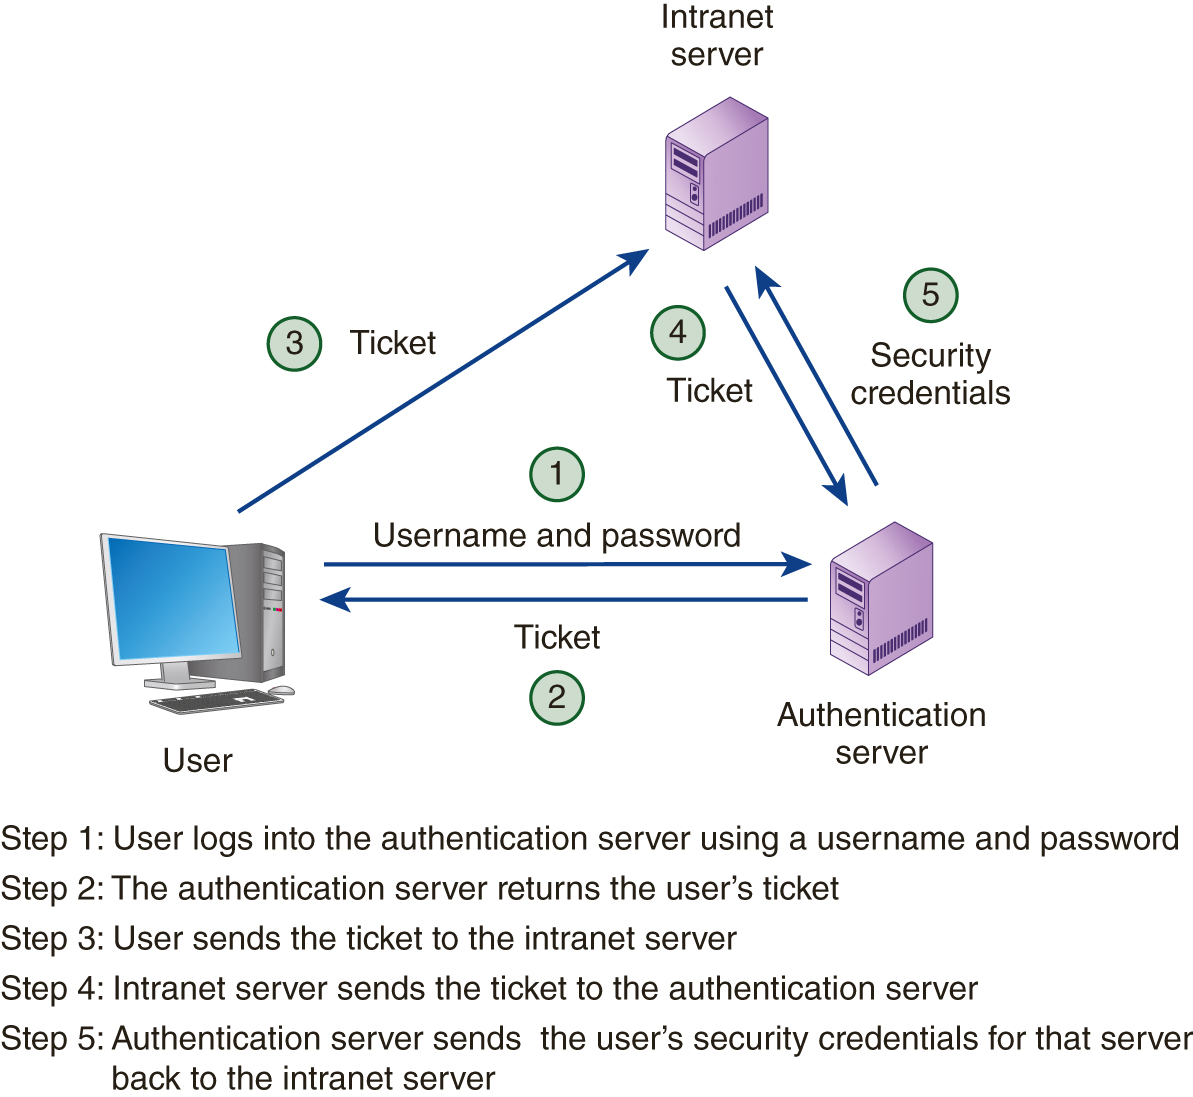 User, authentication server, and intranet server form a triangular form of communication involving five steps as follows. Step 1, username and password: User logs into the authentication server using a username and password. Step 2, ticket: The authentication server returns the user’s ticket back to the user. Step 3, ticket: User sends the ticket to the intranet server. Step 4, ticket: Intranet server sends the ticket to the authentication server. Step 5, security credentials: Authentication server sends the user’s security credentials for that server back to the intranet server.
